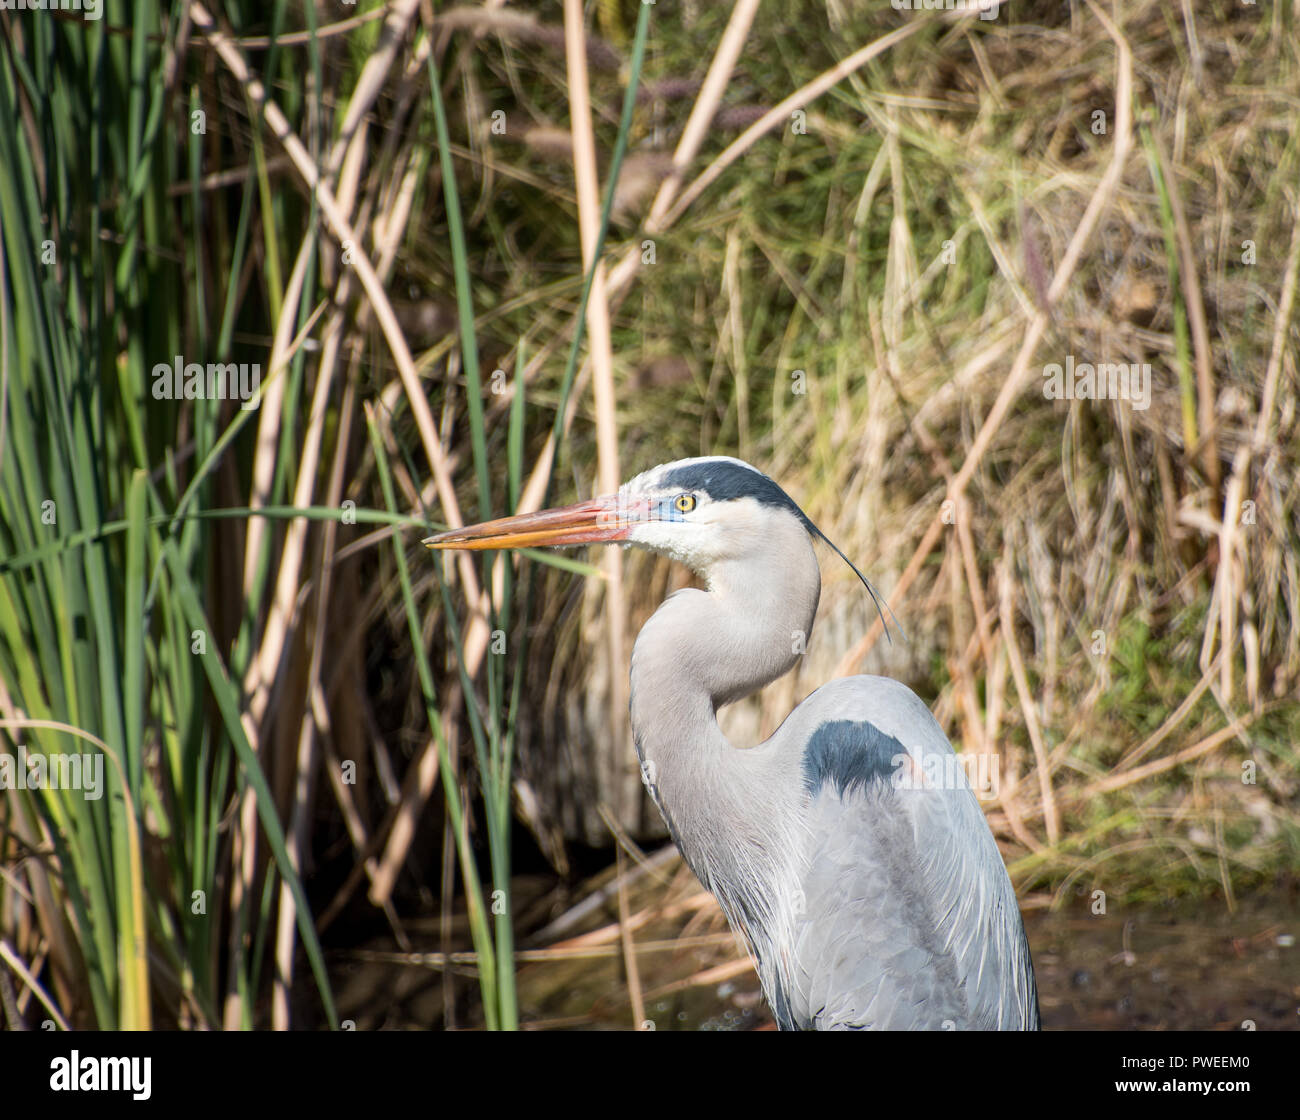 Great Blue Heron waiting for dinner in a marsh like setting Stock Photo